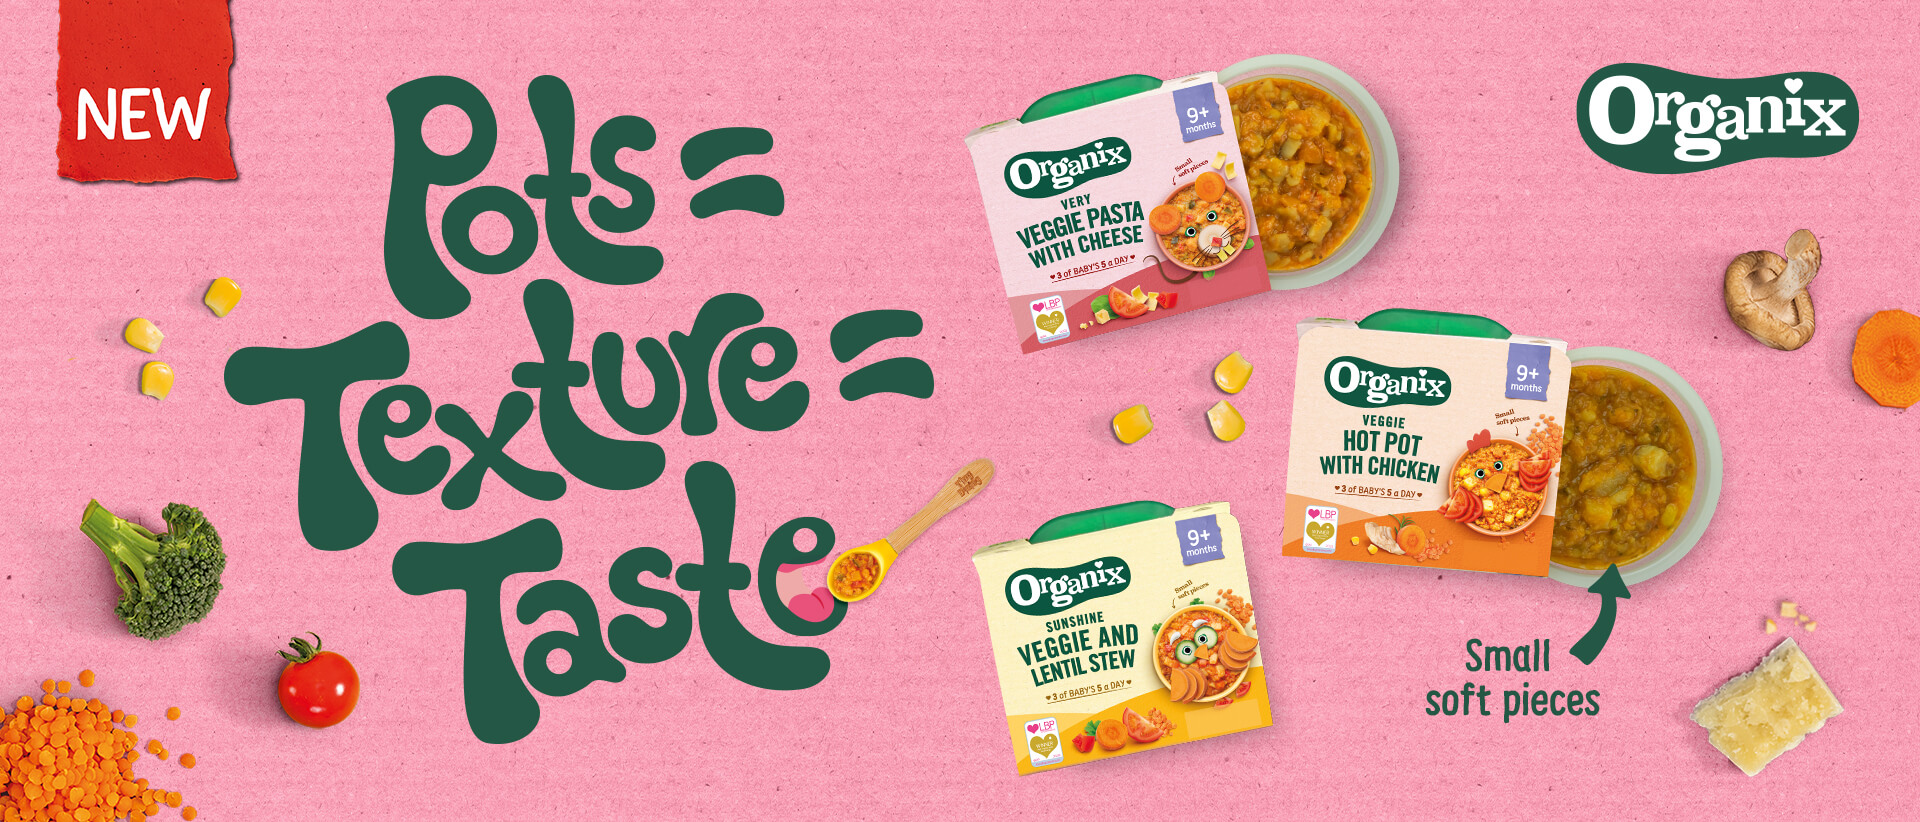 Organix Taste the  Texture banner. Organix meal pots with sleeve partially removed so you can see the texture of the food. Ingredients floating around the wording and meal pots. 